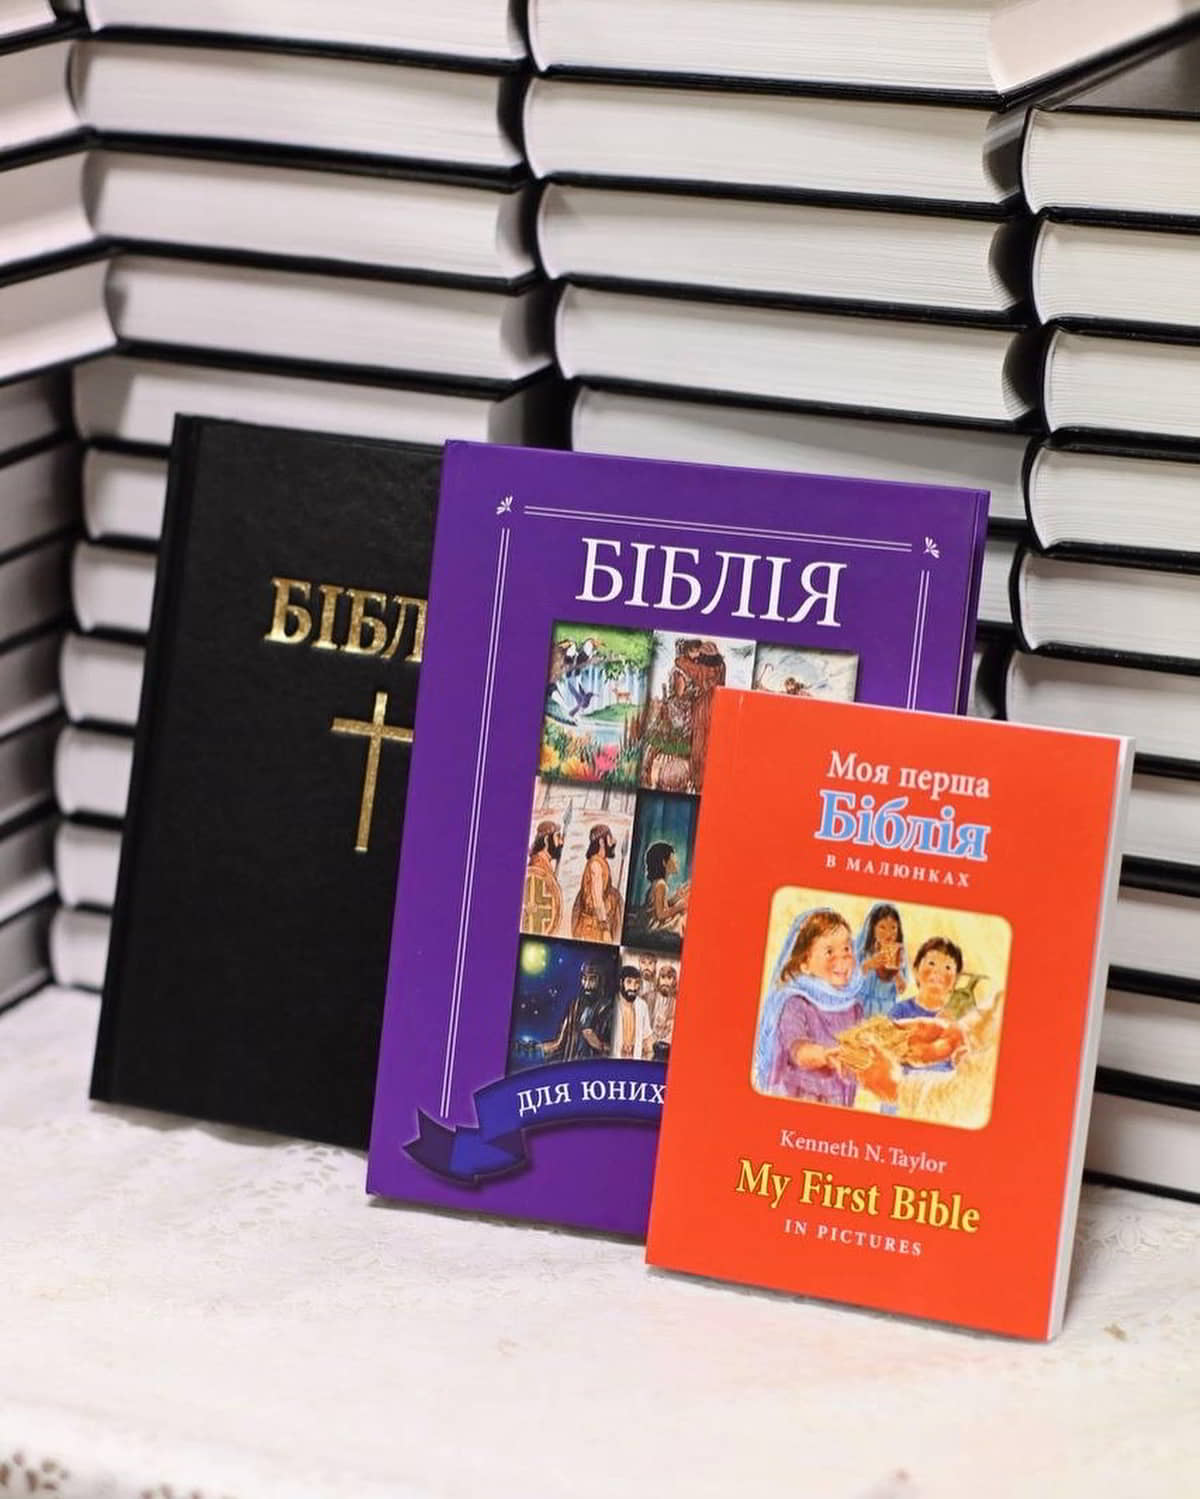 Prison Fellowship International and Eastern European Mission Partner to Distribute More Than 100,000 Bibles and Scripture Resources